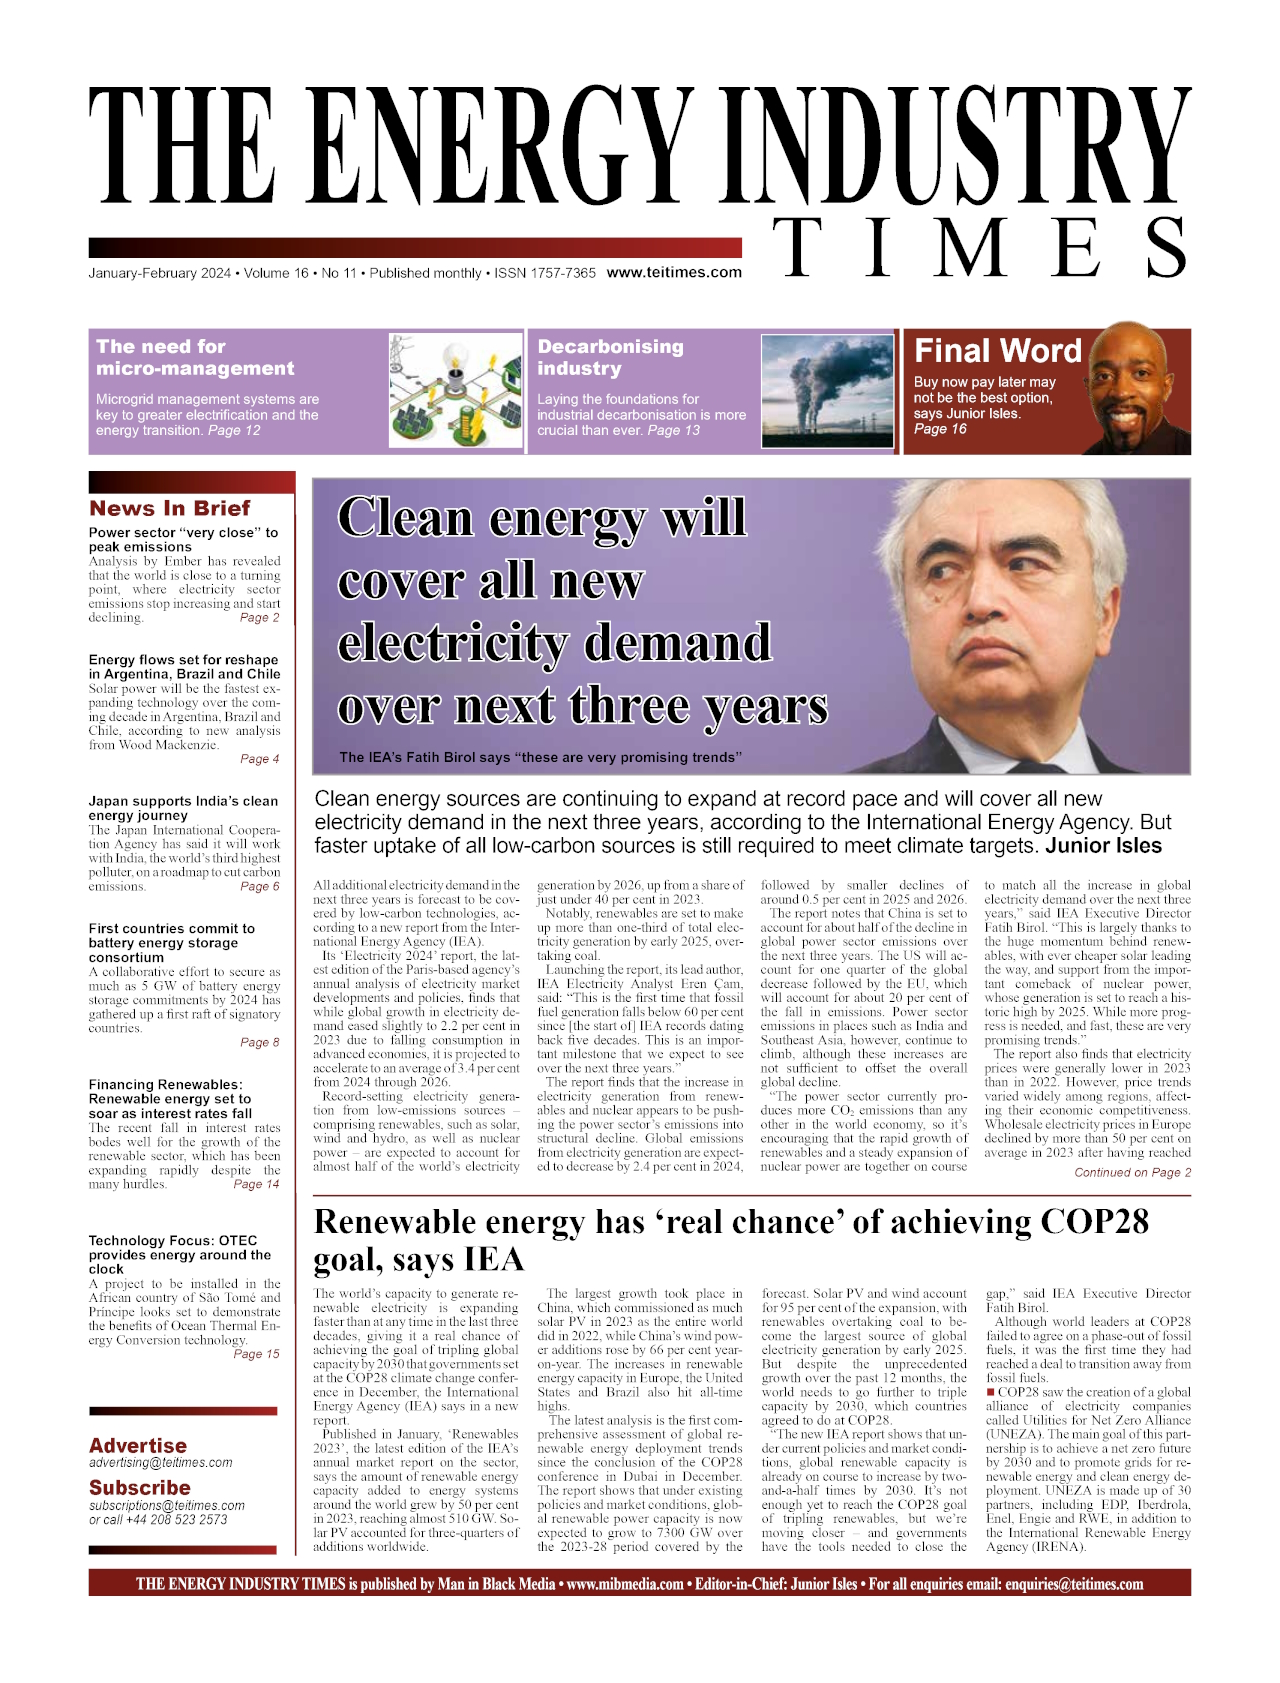 Selected highlights from the January February 2024 edition of The Energy Industry Times